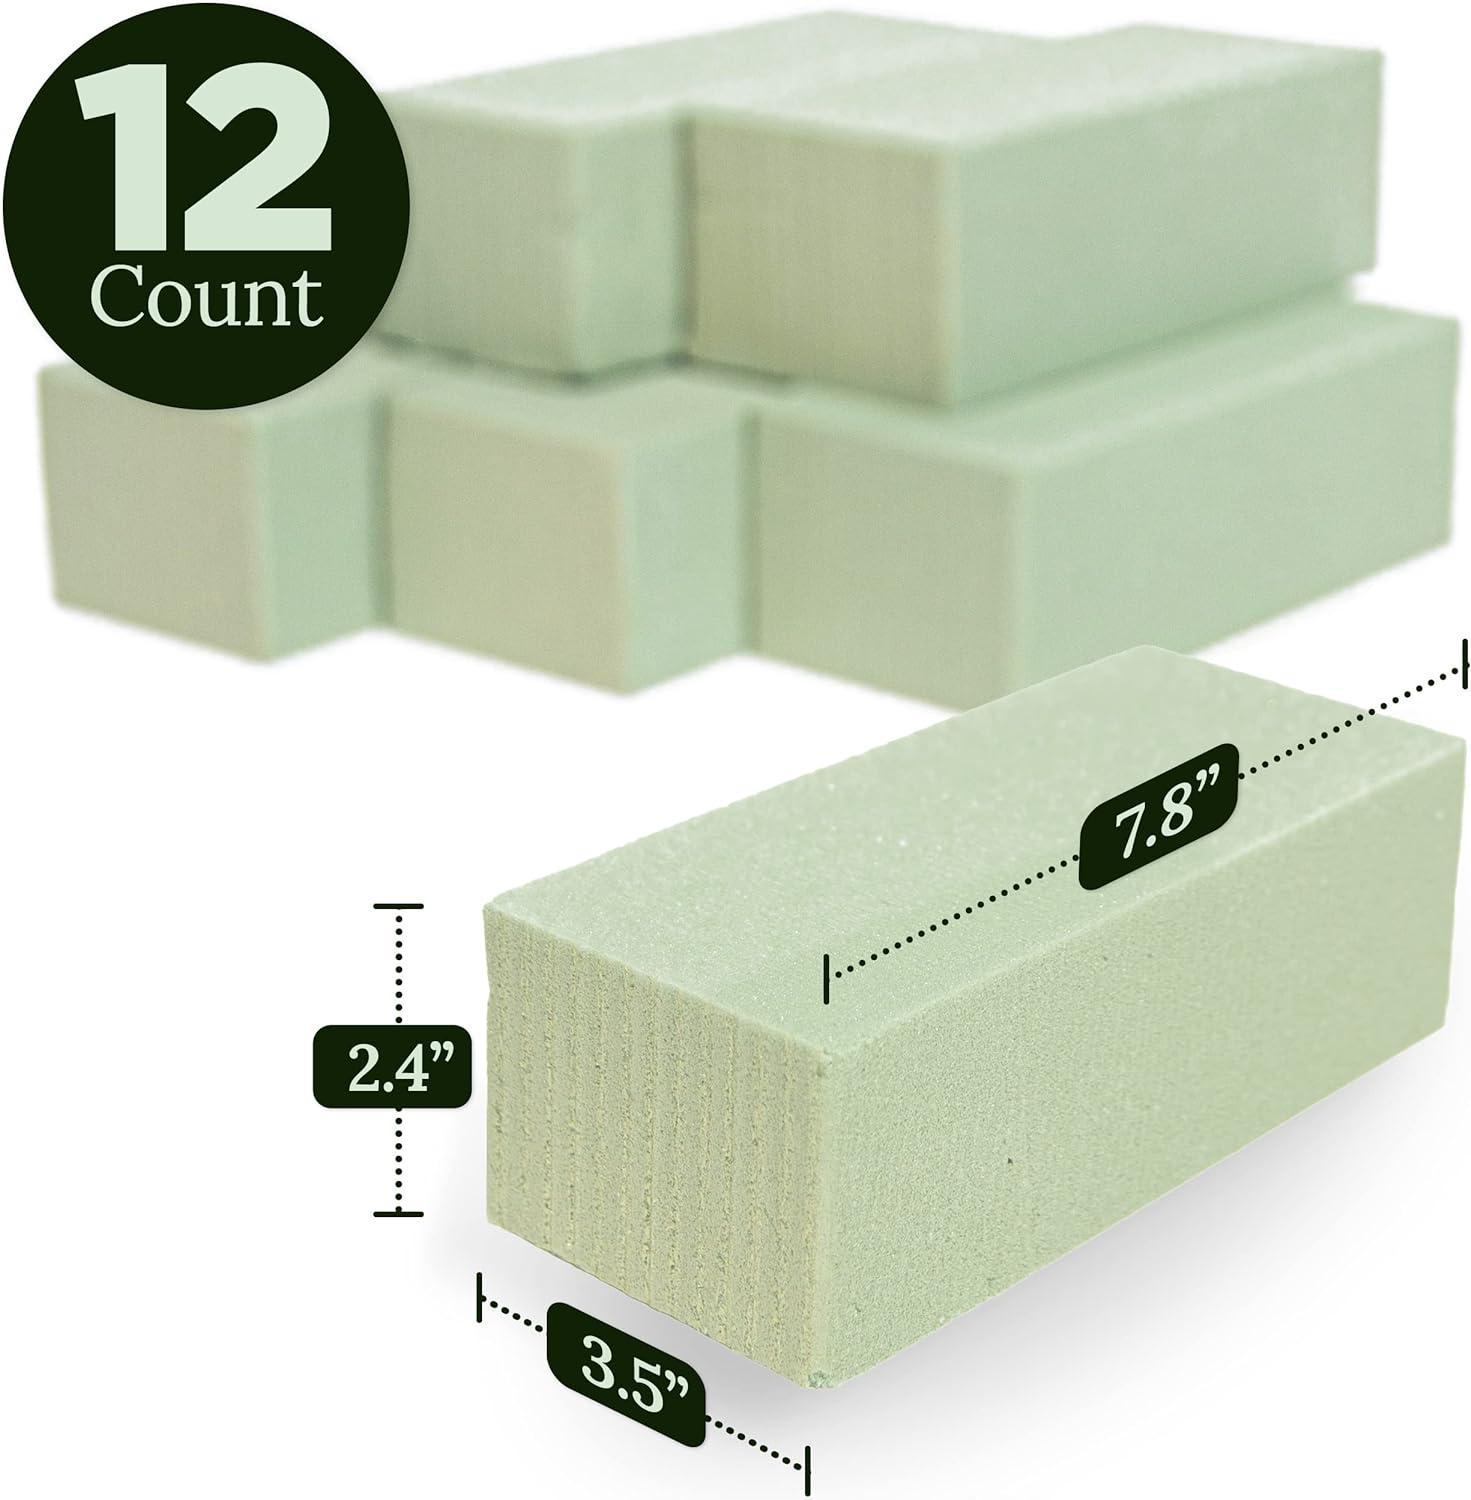 12 Green Floral Foam Squares for Use in Floral Arranging and Crafts